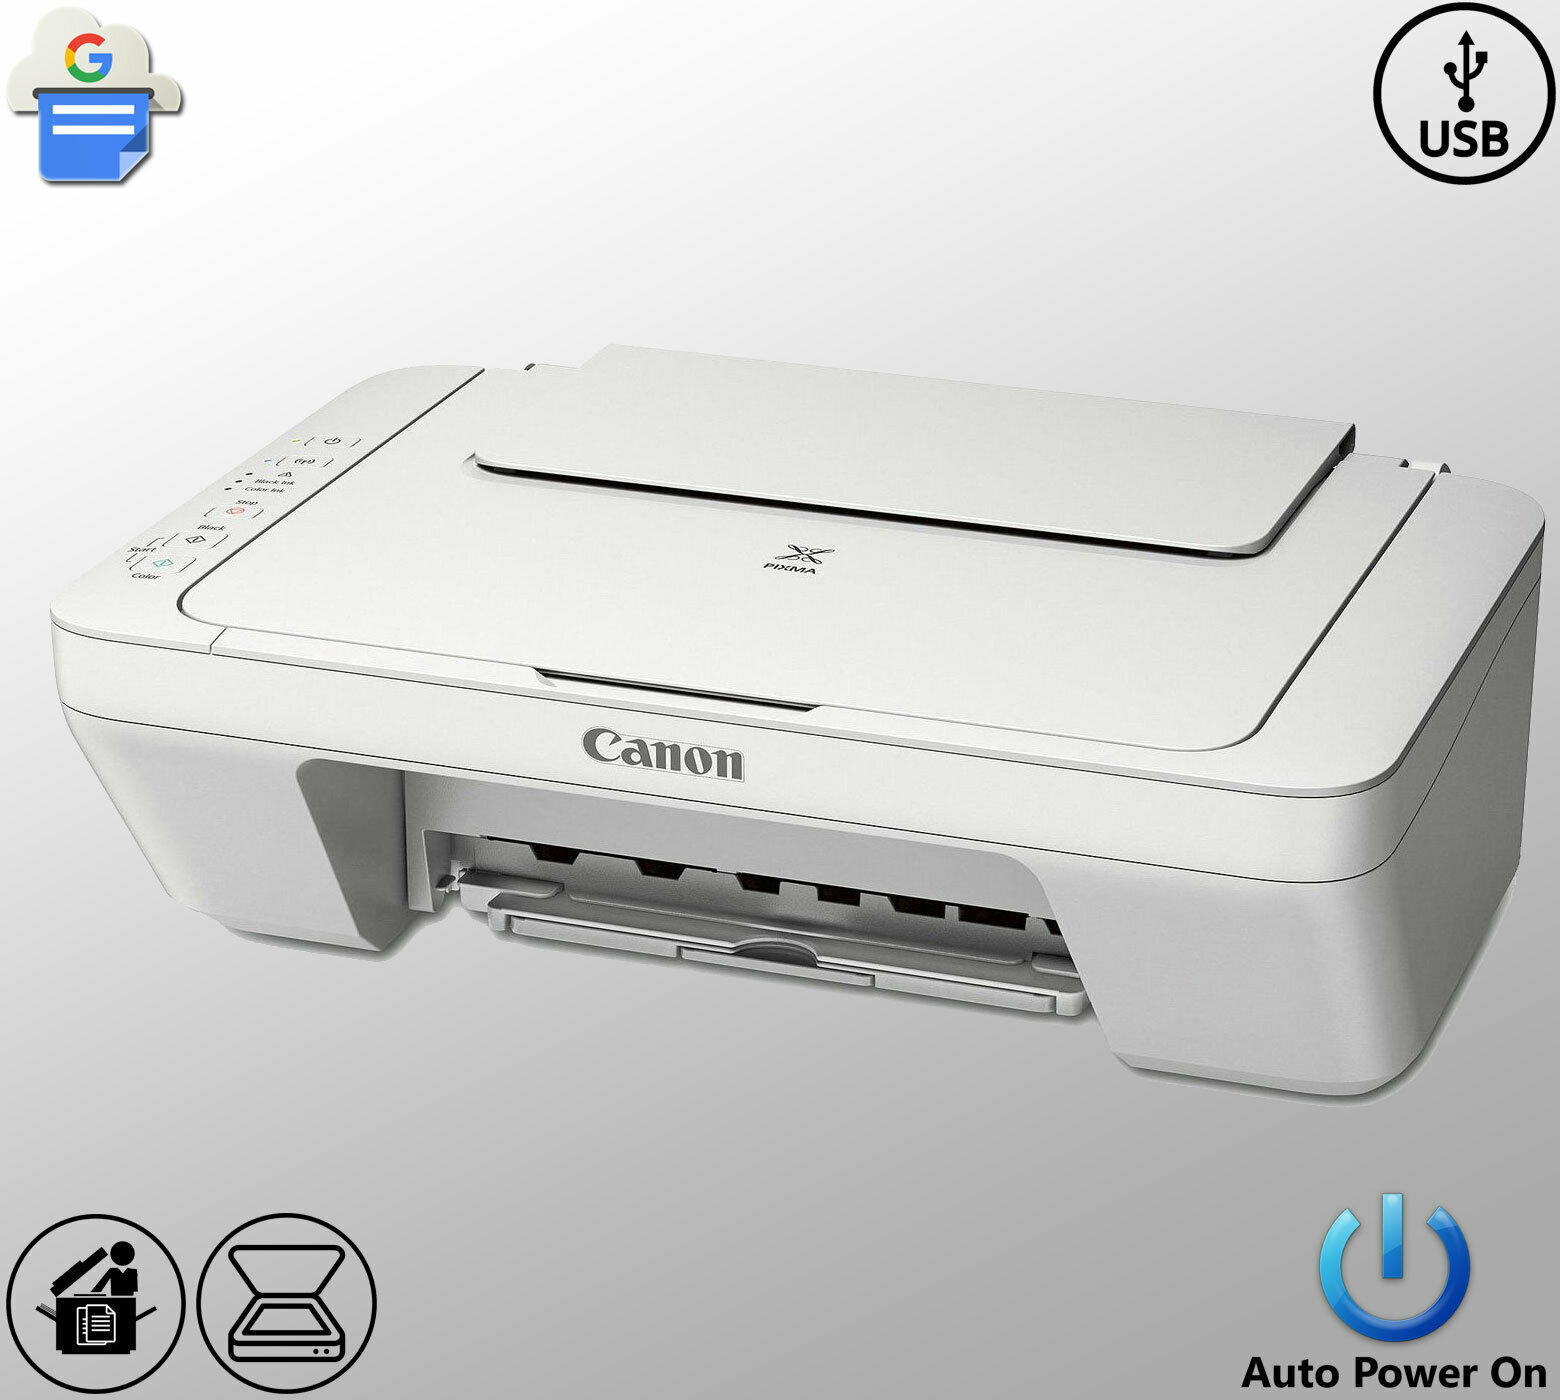 Canon Color Printer Compact All-in-One Copier Scanner + USB (ink not included)